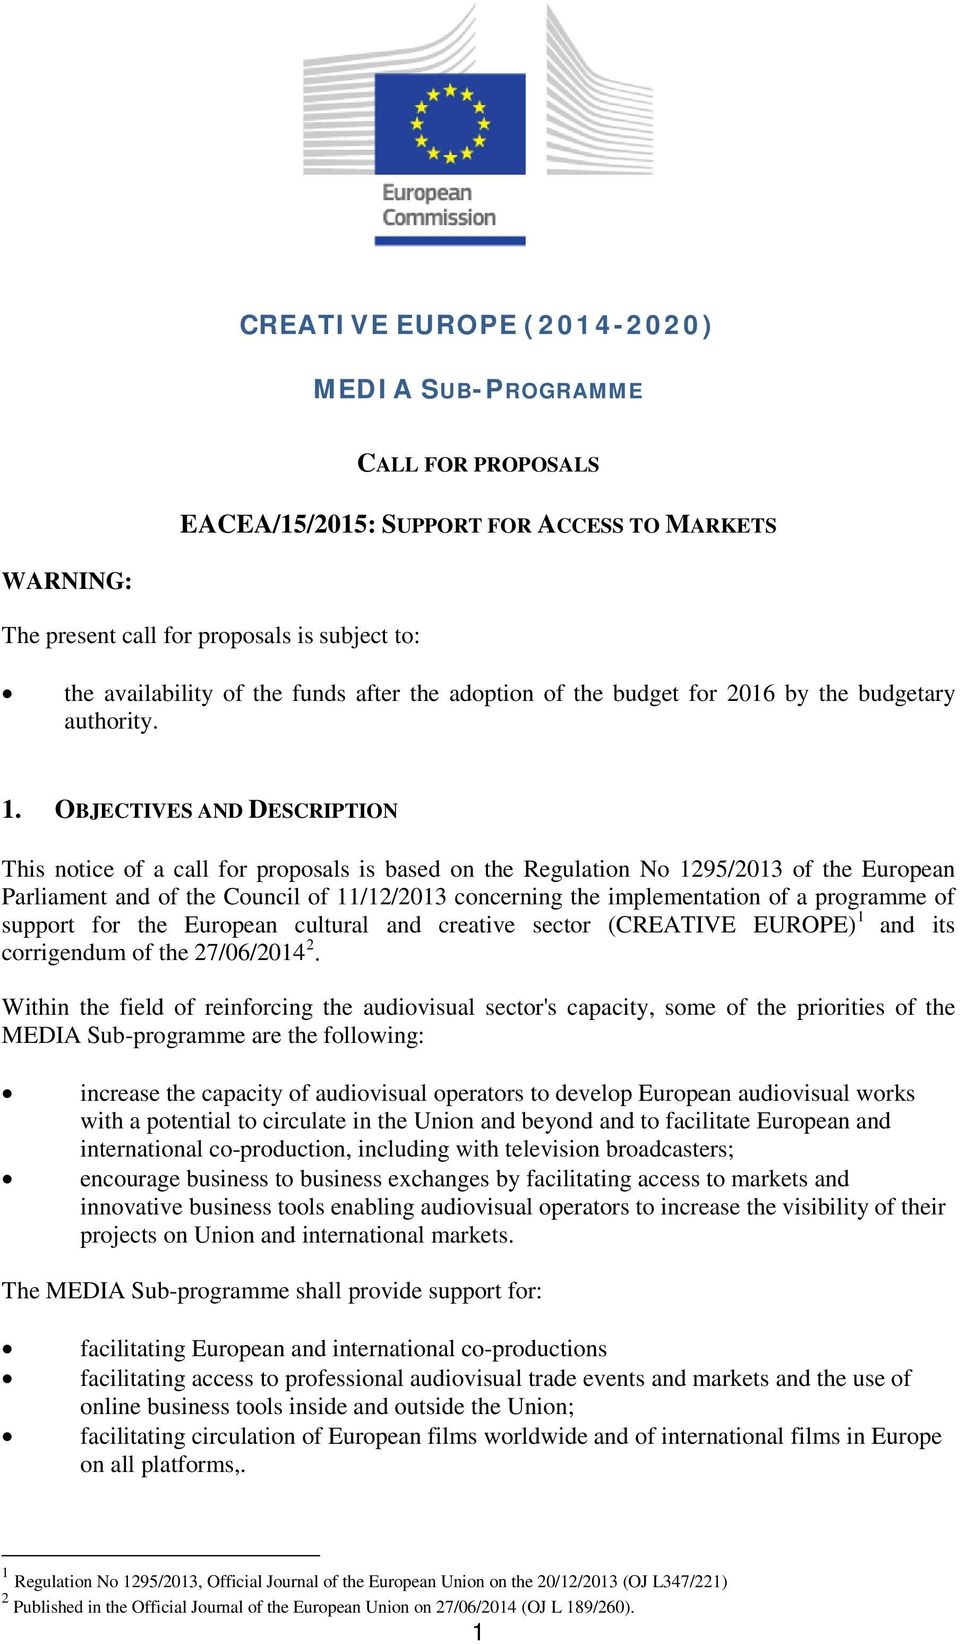 OBJECTIVES AND DESCRIPTION This notice of a call for proposals is based on the Regulation No 1295/2013 of the European Parliament and of the Council of 11/12/2013 concerning the implementation of a